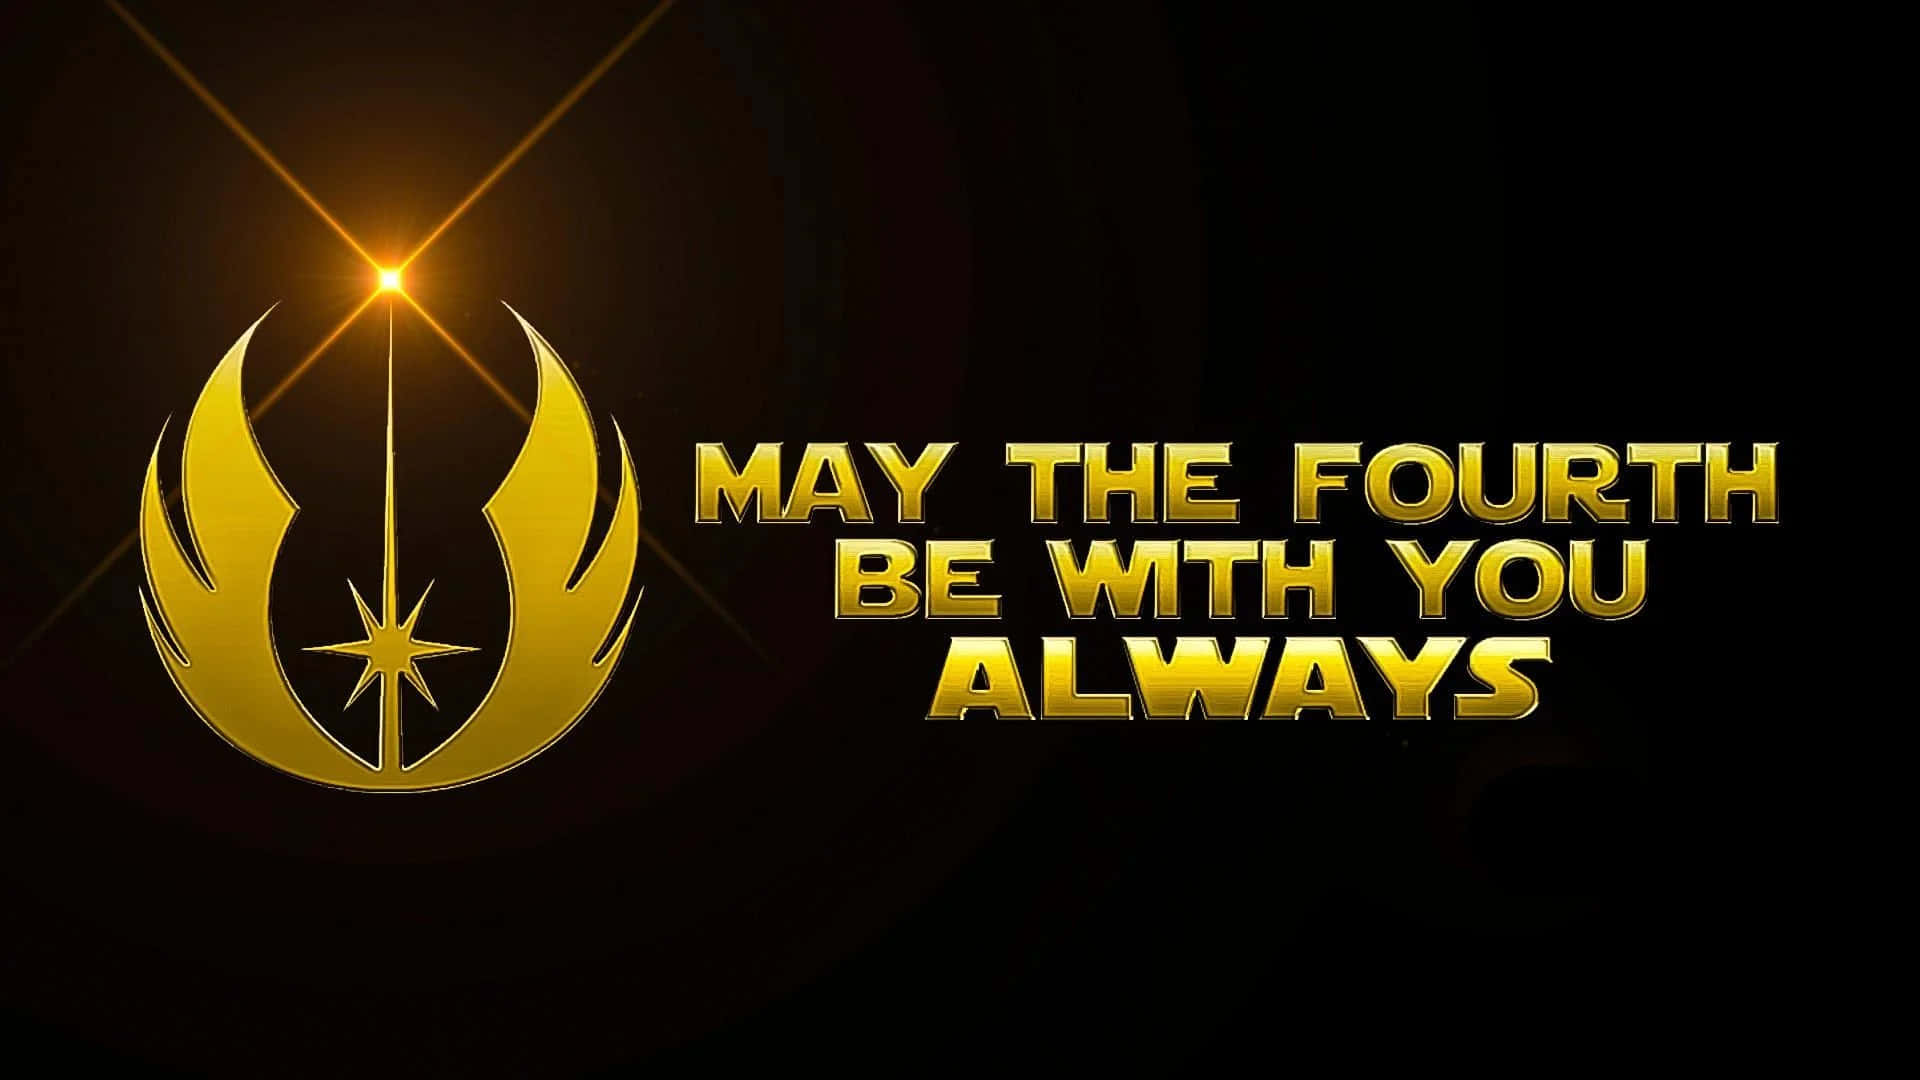 May The Force Be With You - Star Wars Universe Illustration Wallpaper